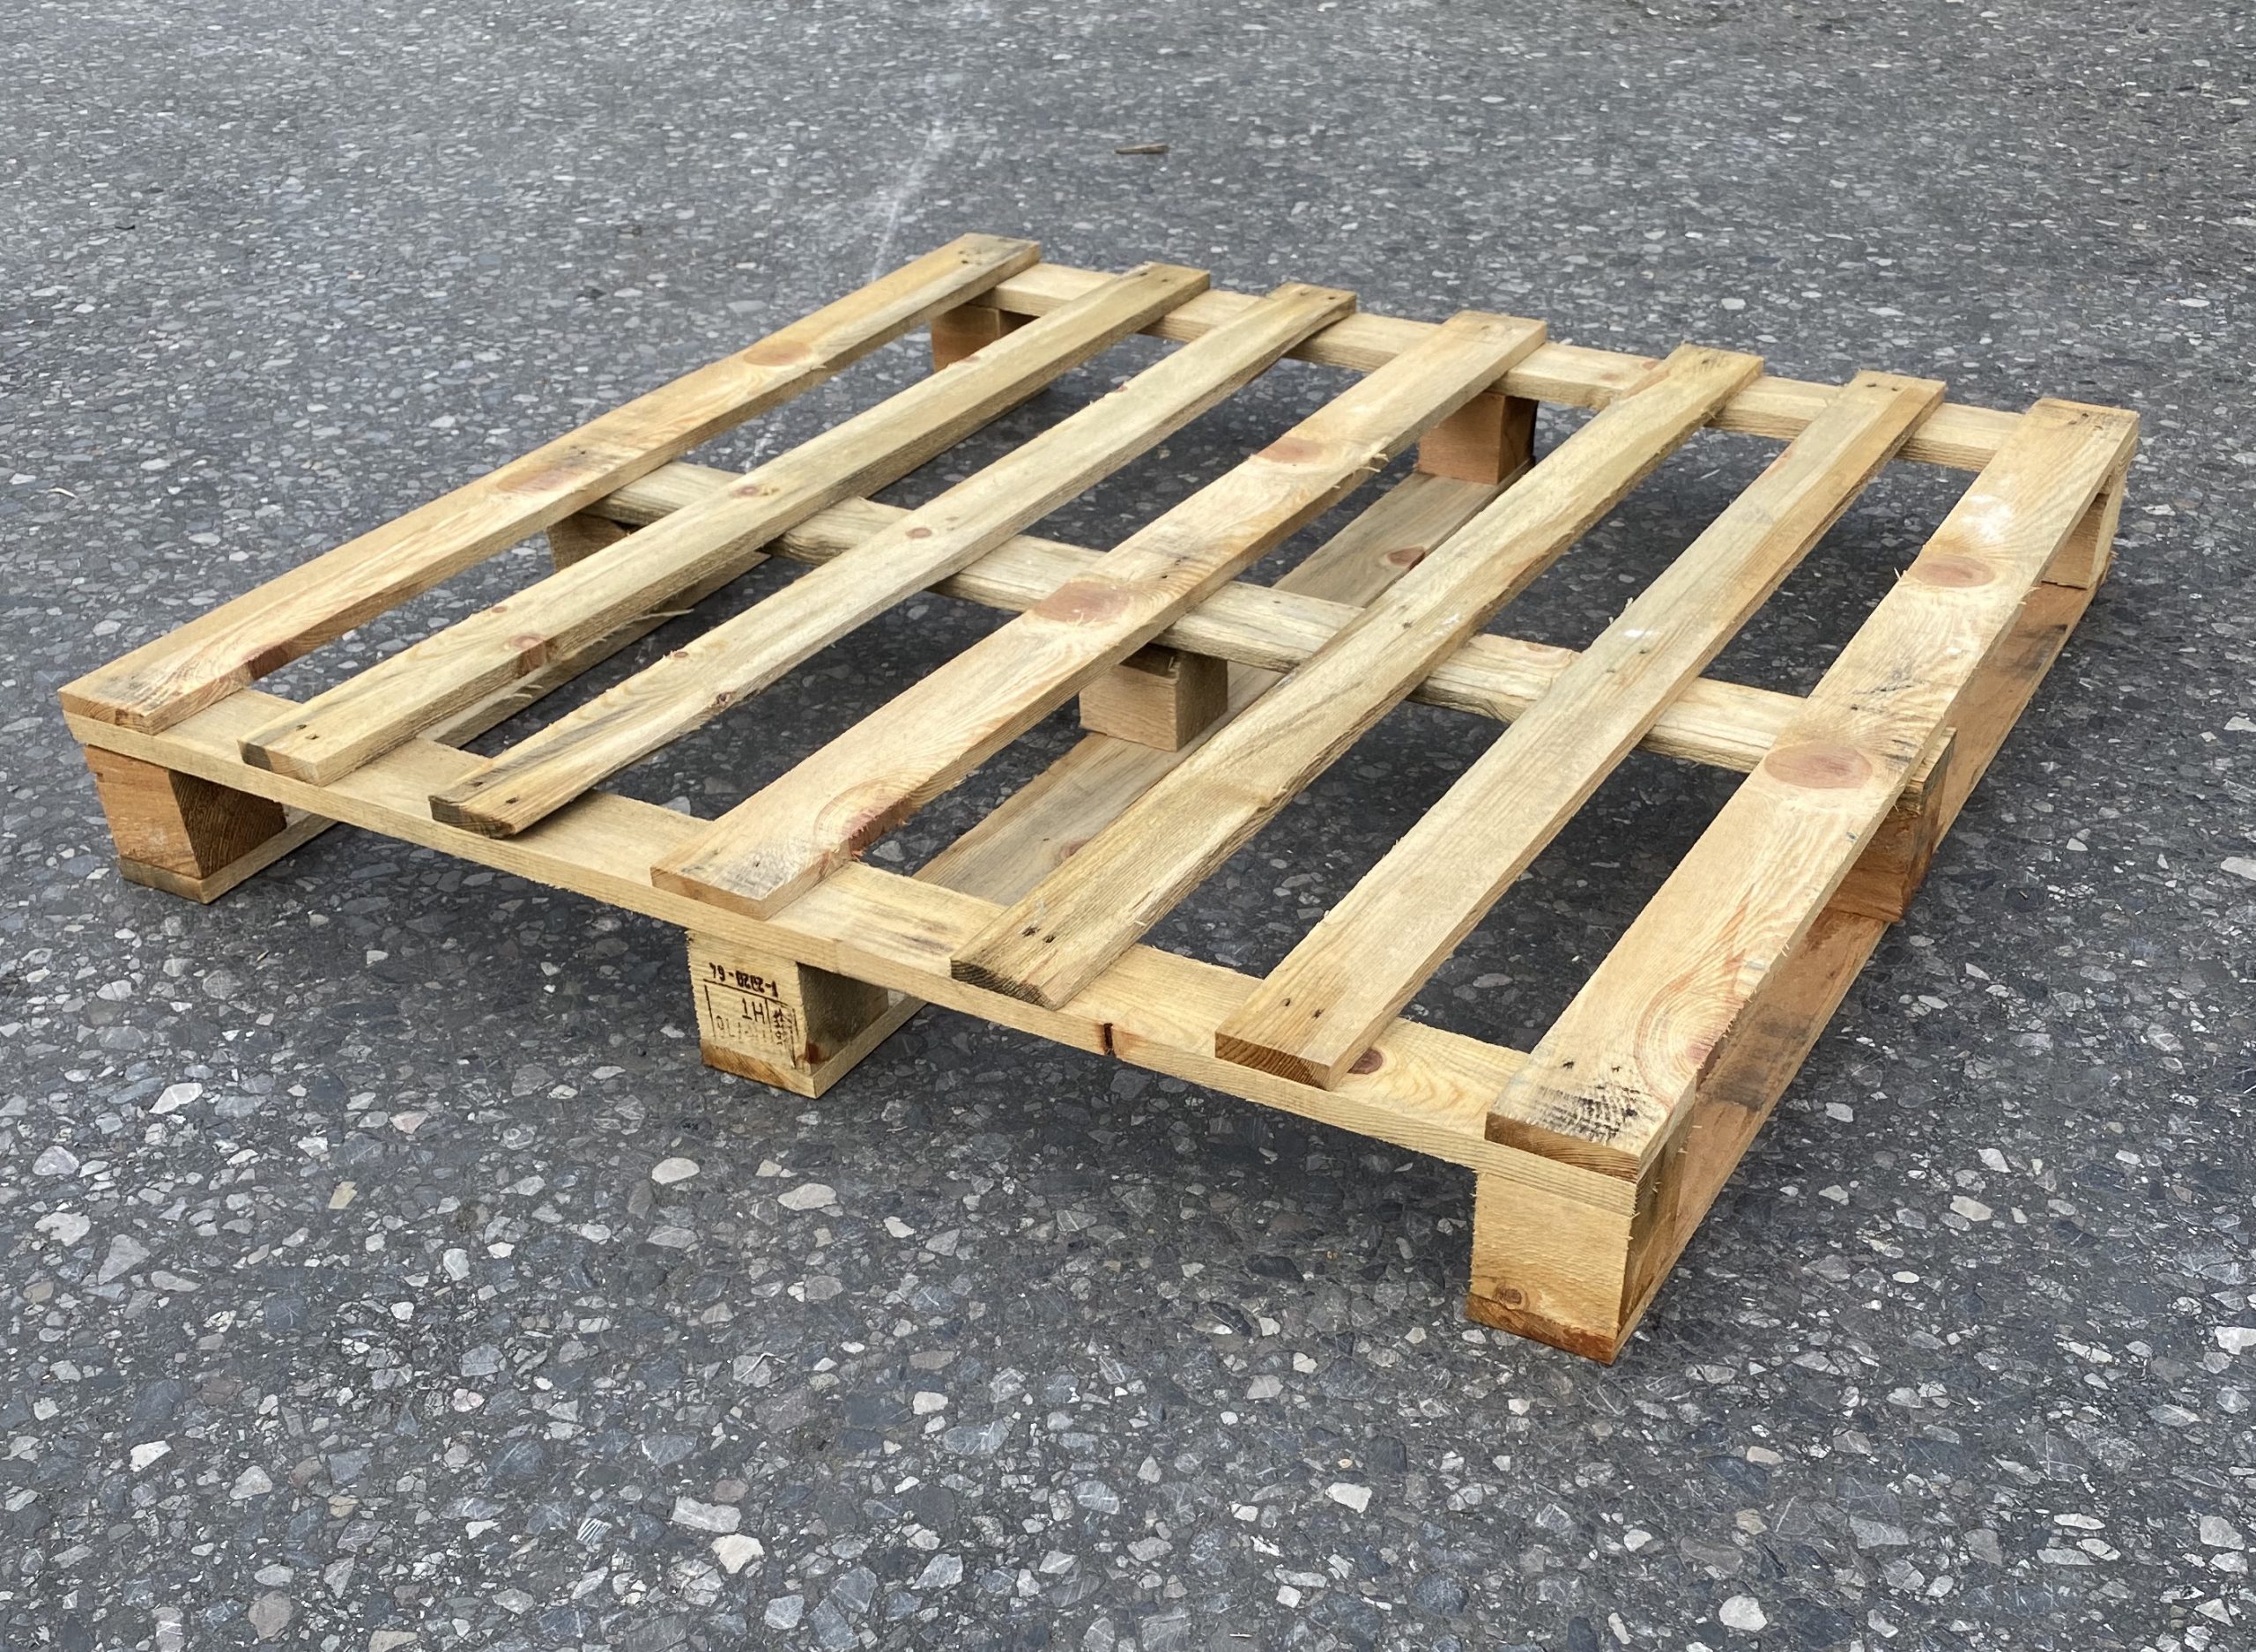 Used Wooden Pallet